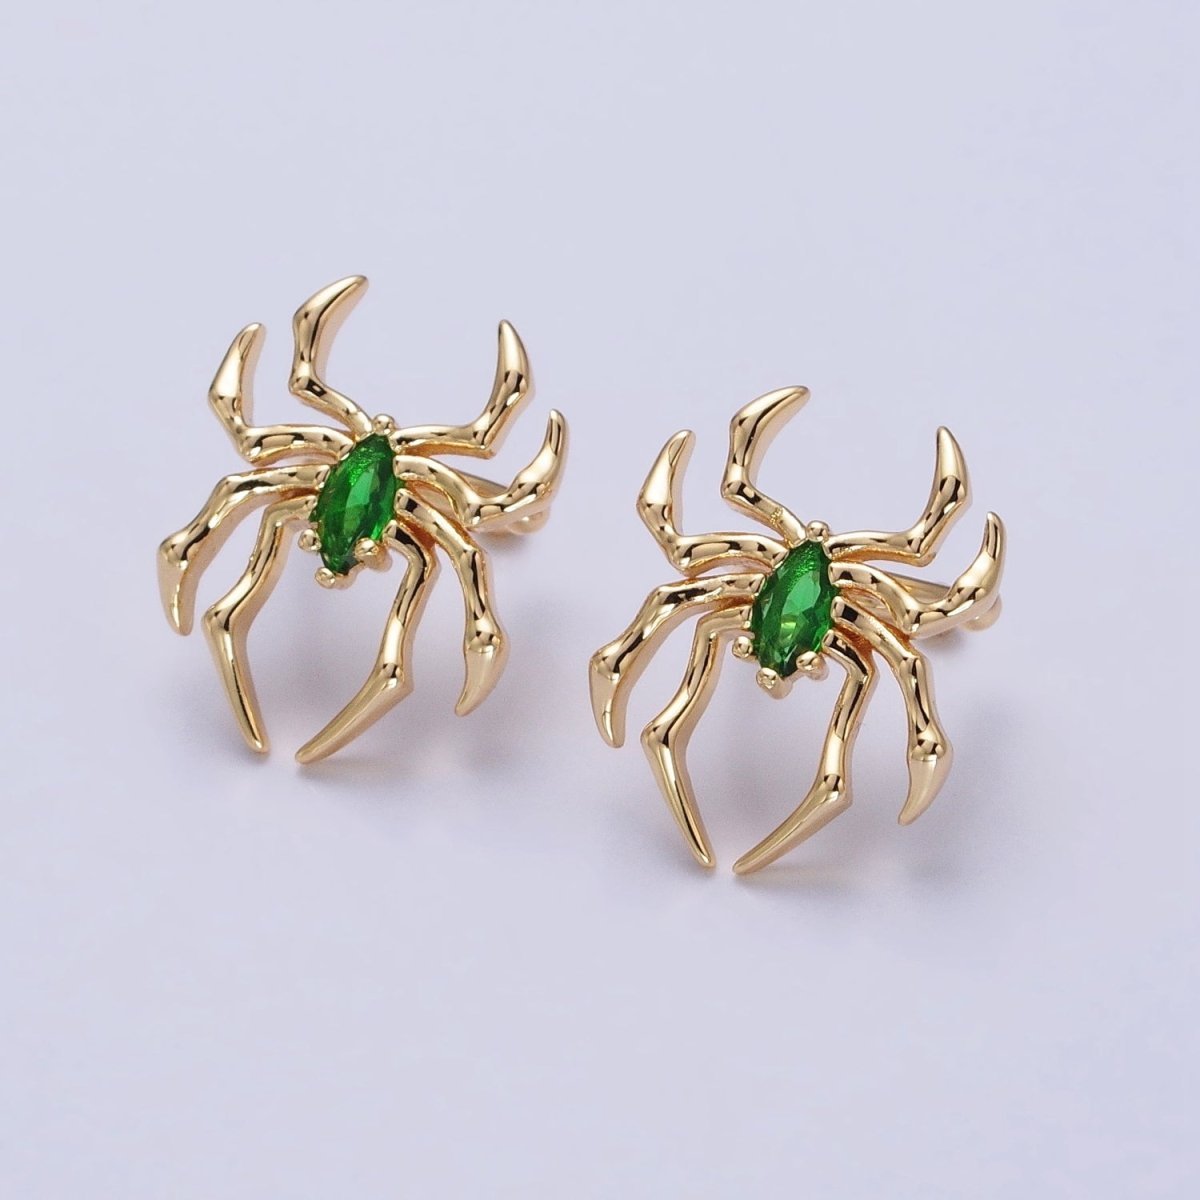 Gold Spider Ear Cuff Earring with Emerald Green Cz Stone for Halloween AB645 AB646 - DLUXCA